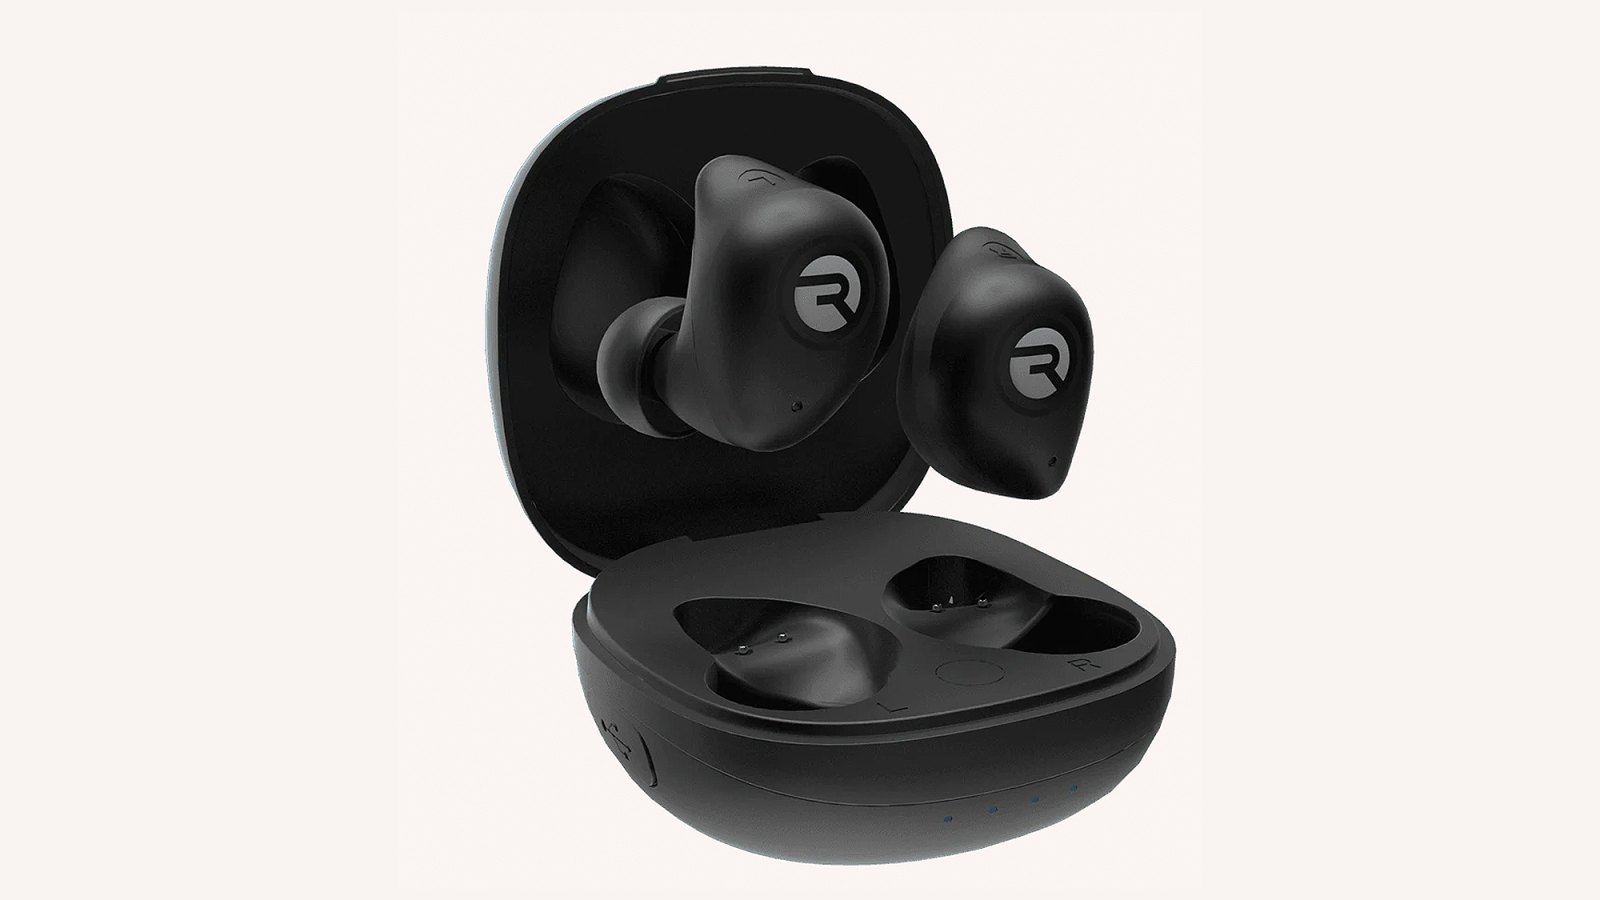 The Fitness Earbuds